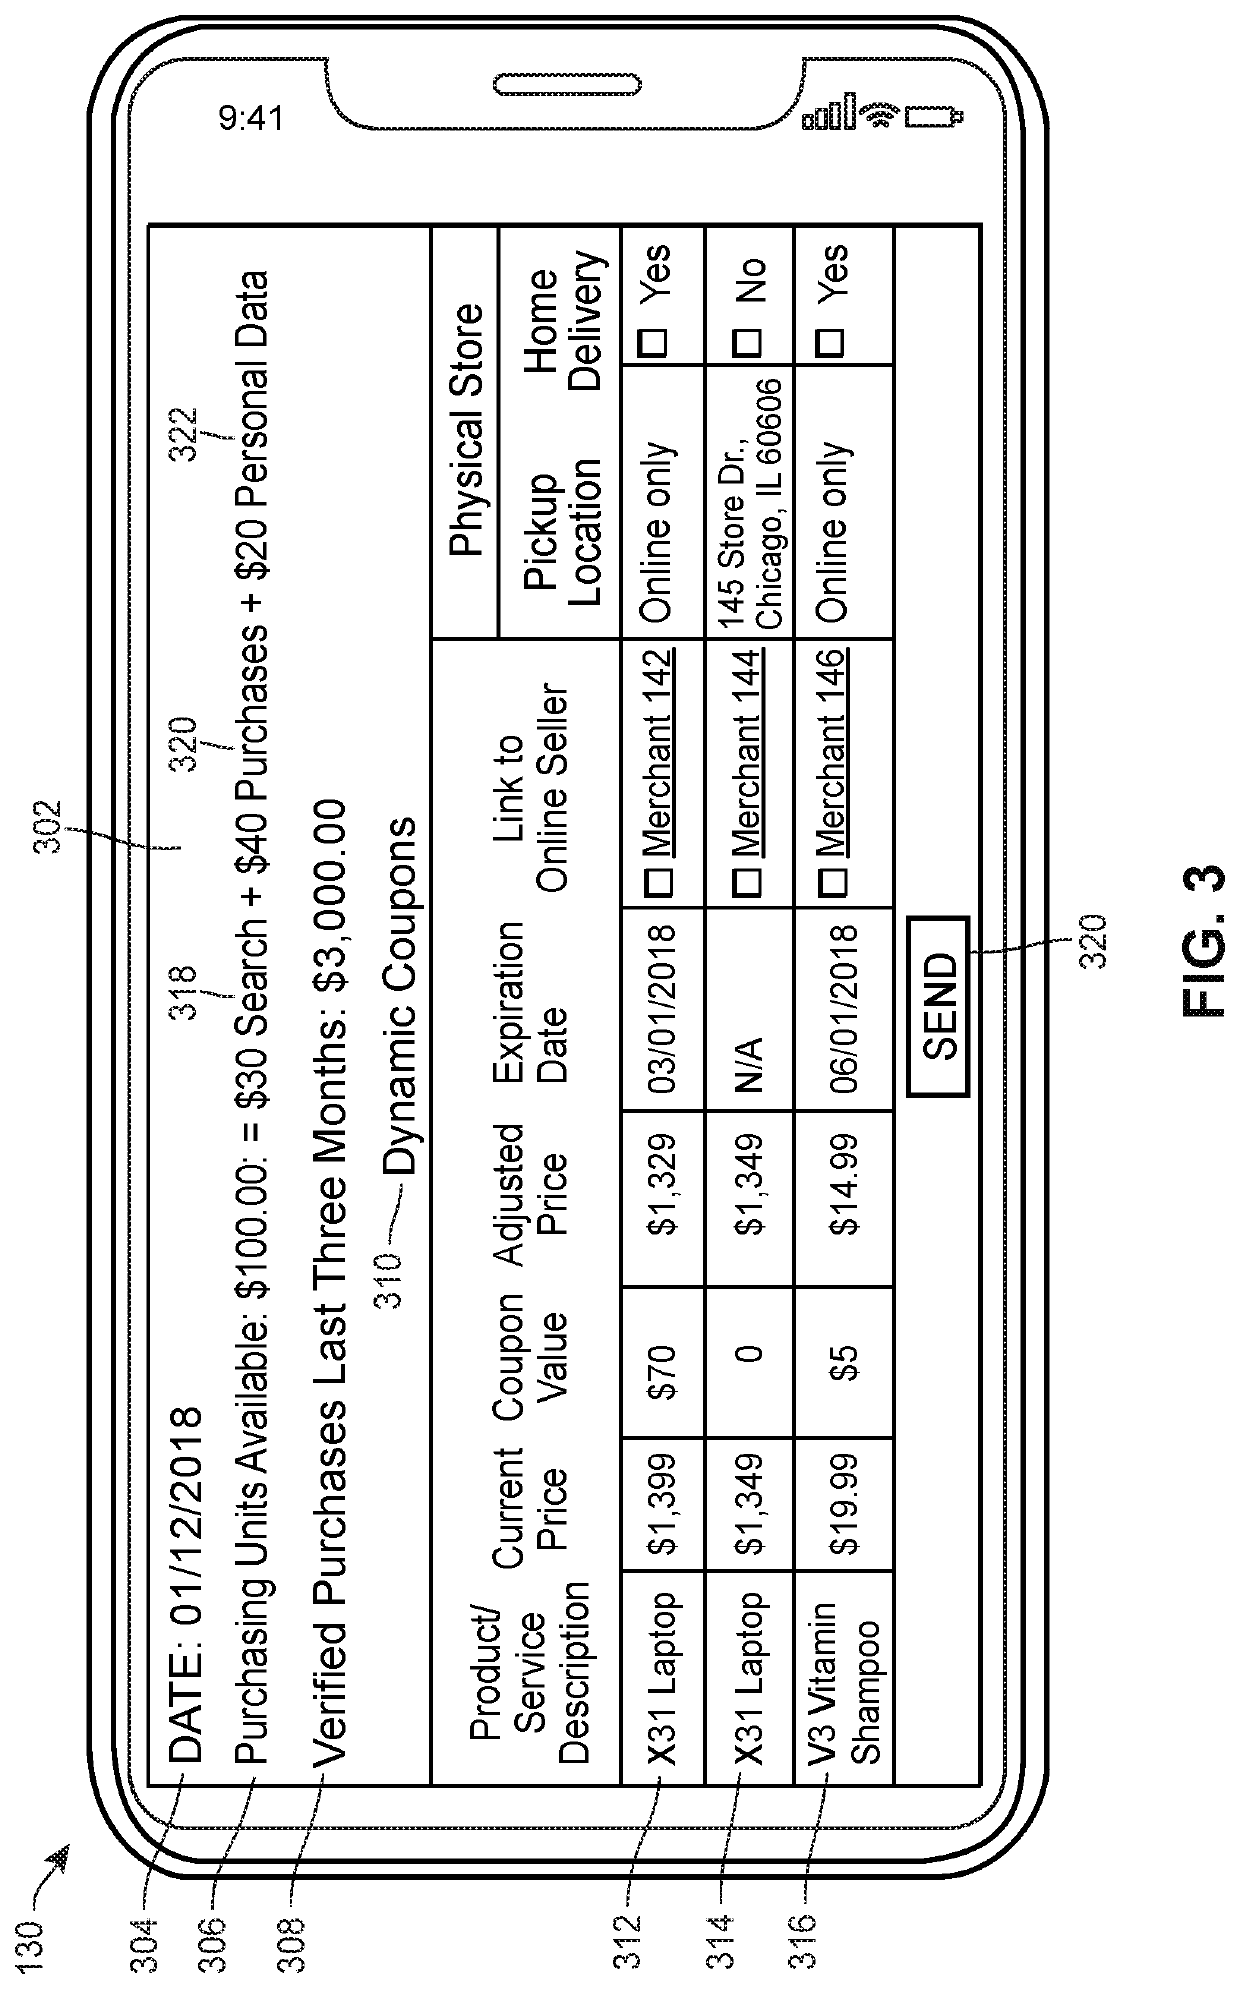 Machine-learning based systems and methods for optimizing search engine results